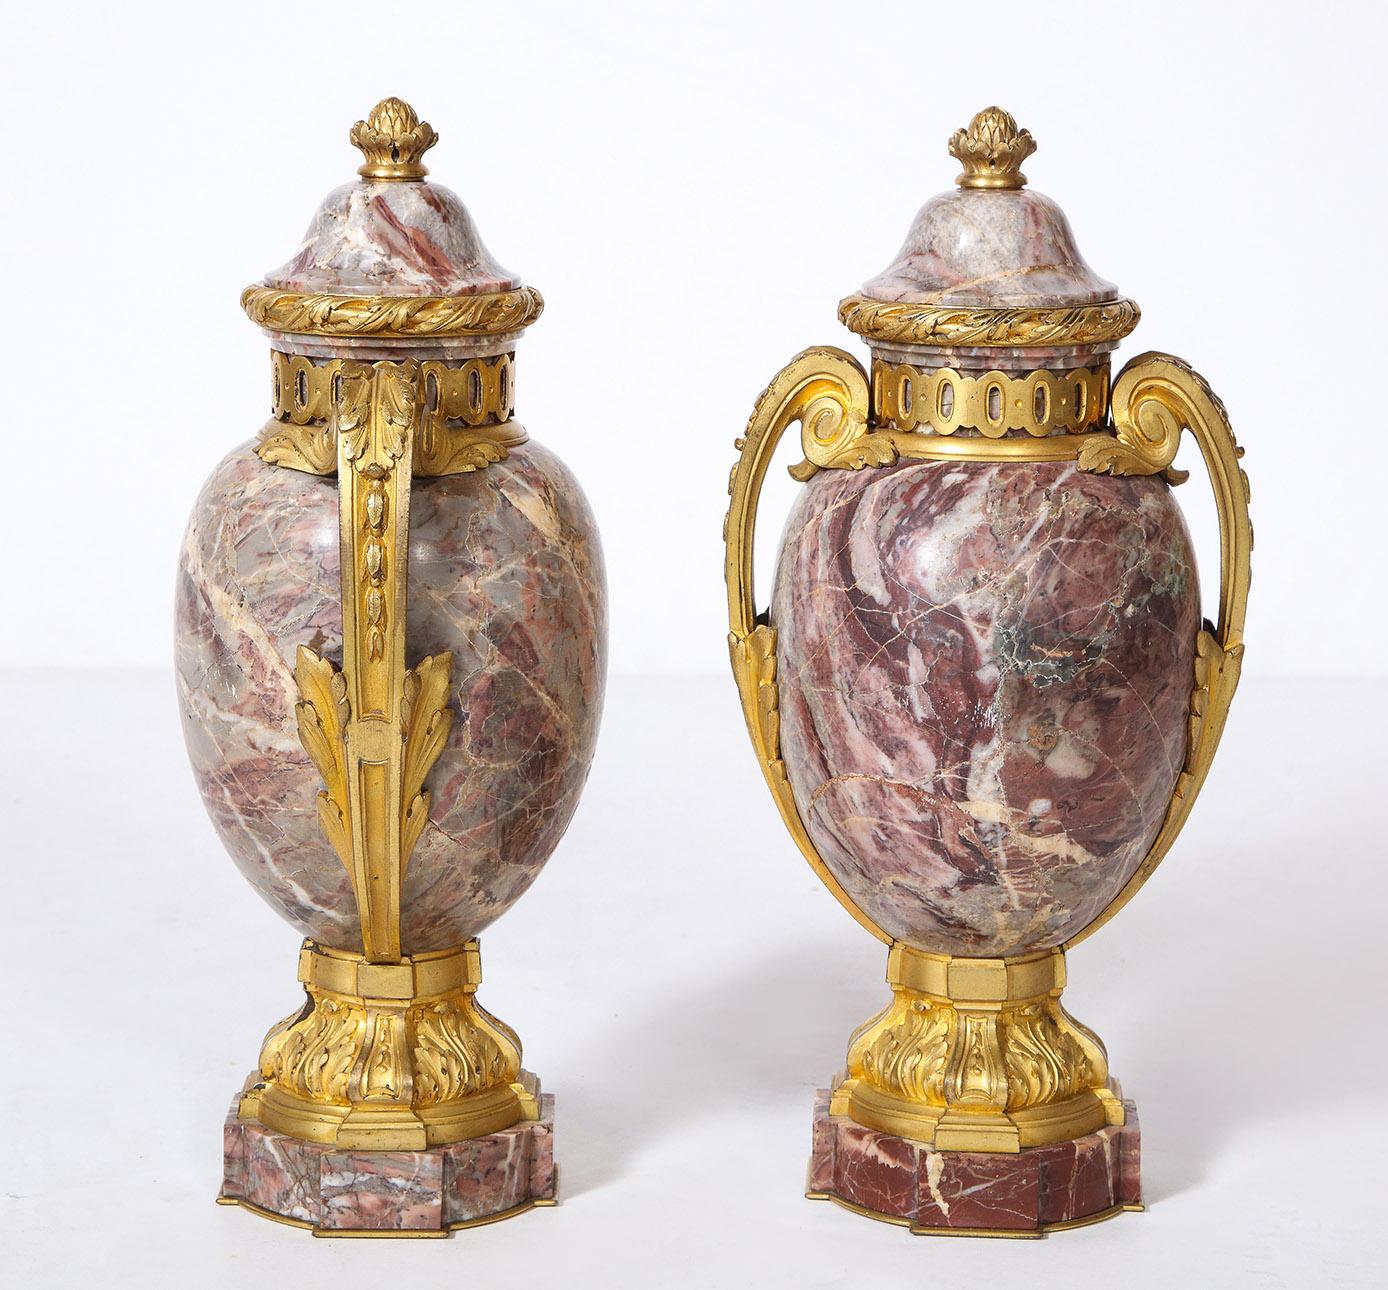 Pair of French Louis XVI style bronze mounted marble urns

The Rosso Levanto marble urns with well chased Louis XVI style bronze mounts.